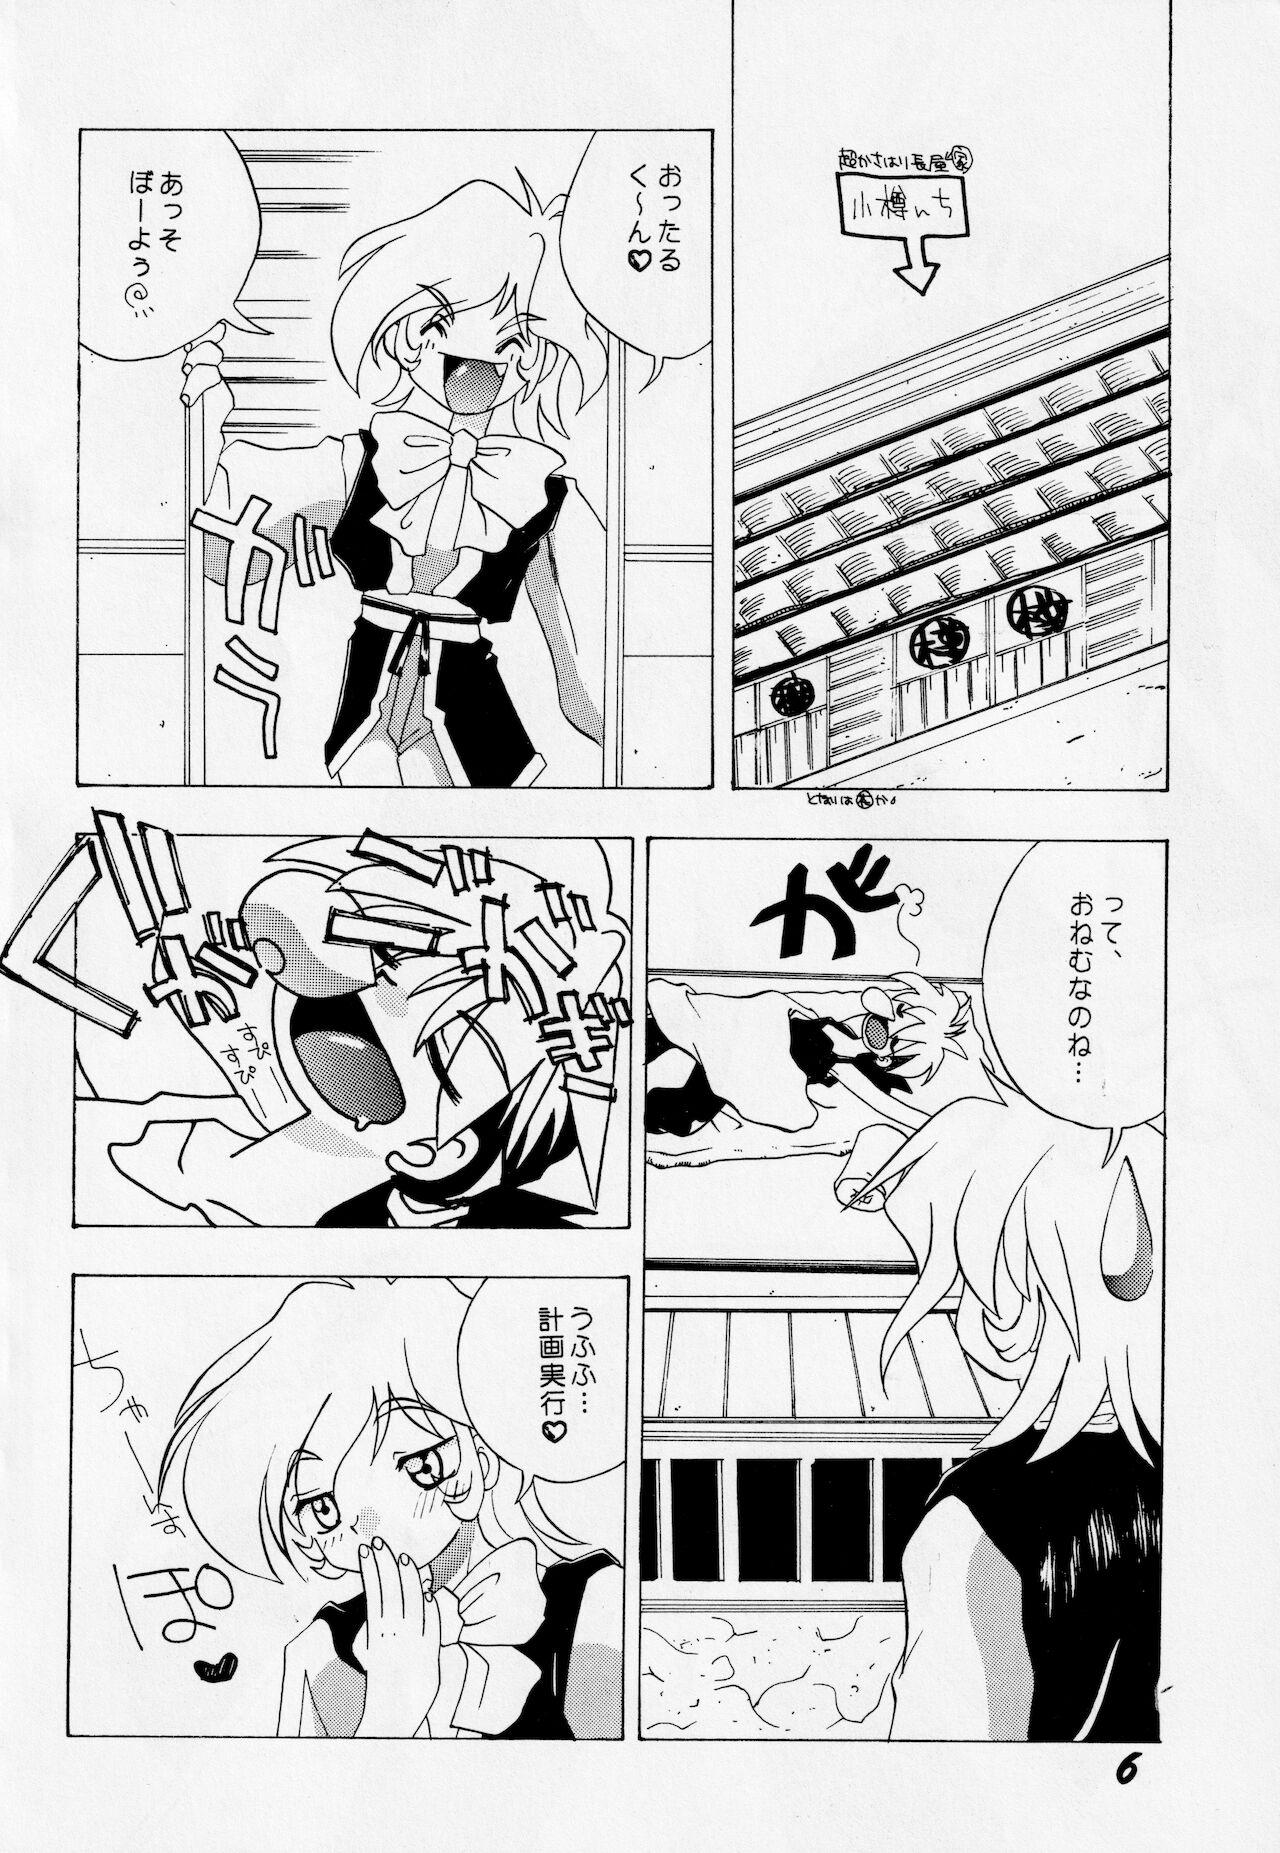 Tight Abaredaiko 2 - Saber marionette Cocksuckers - Page 5